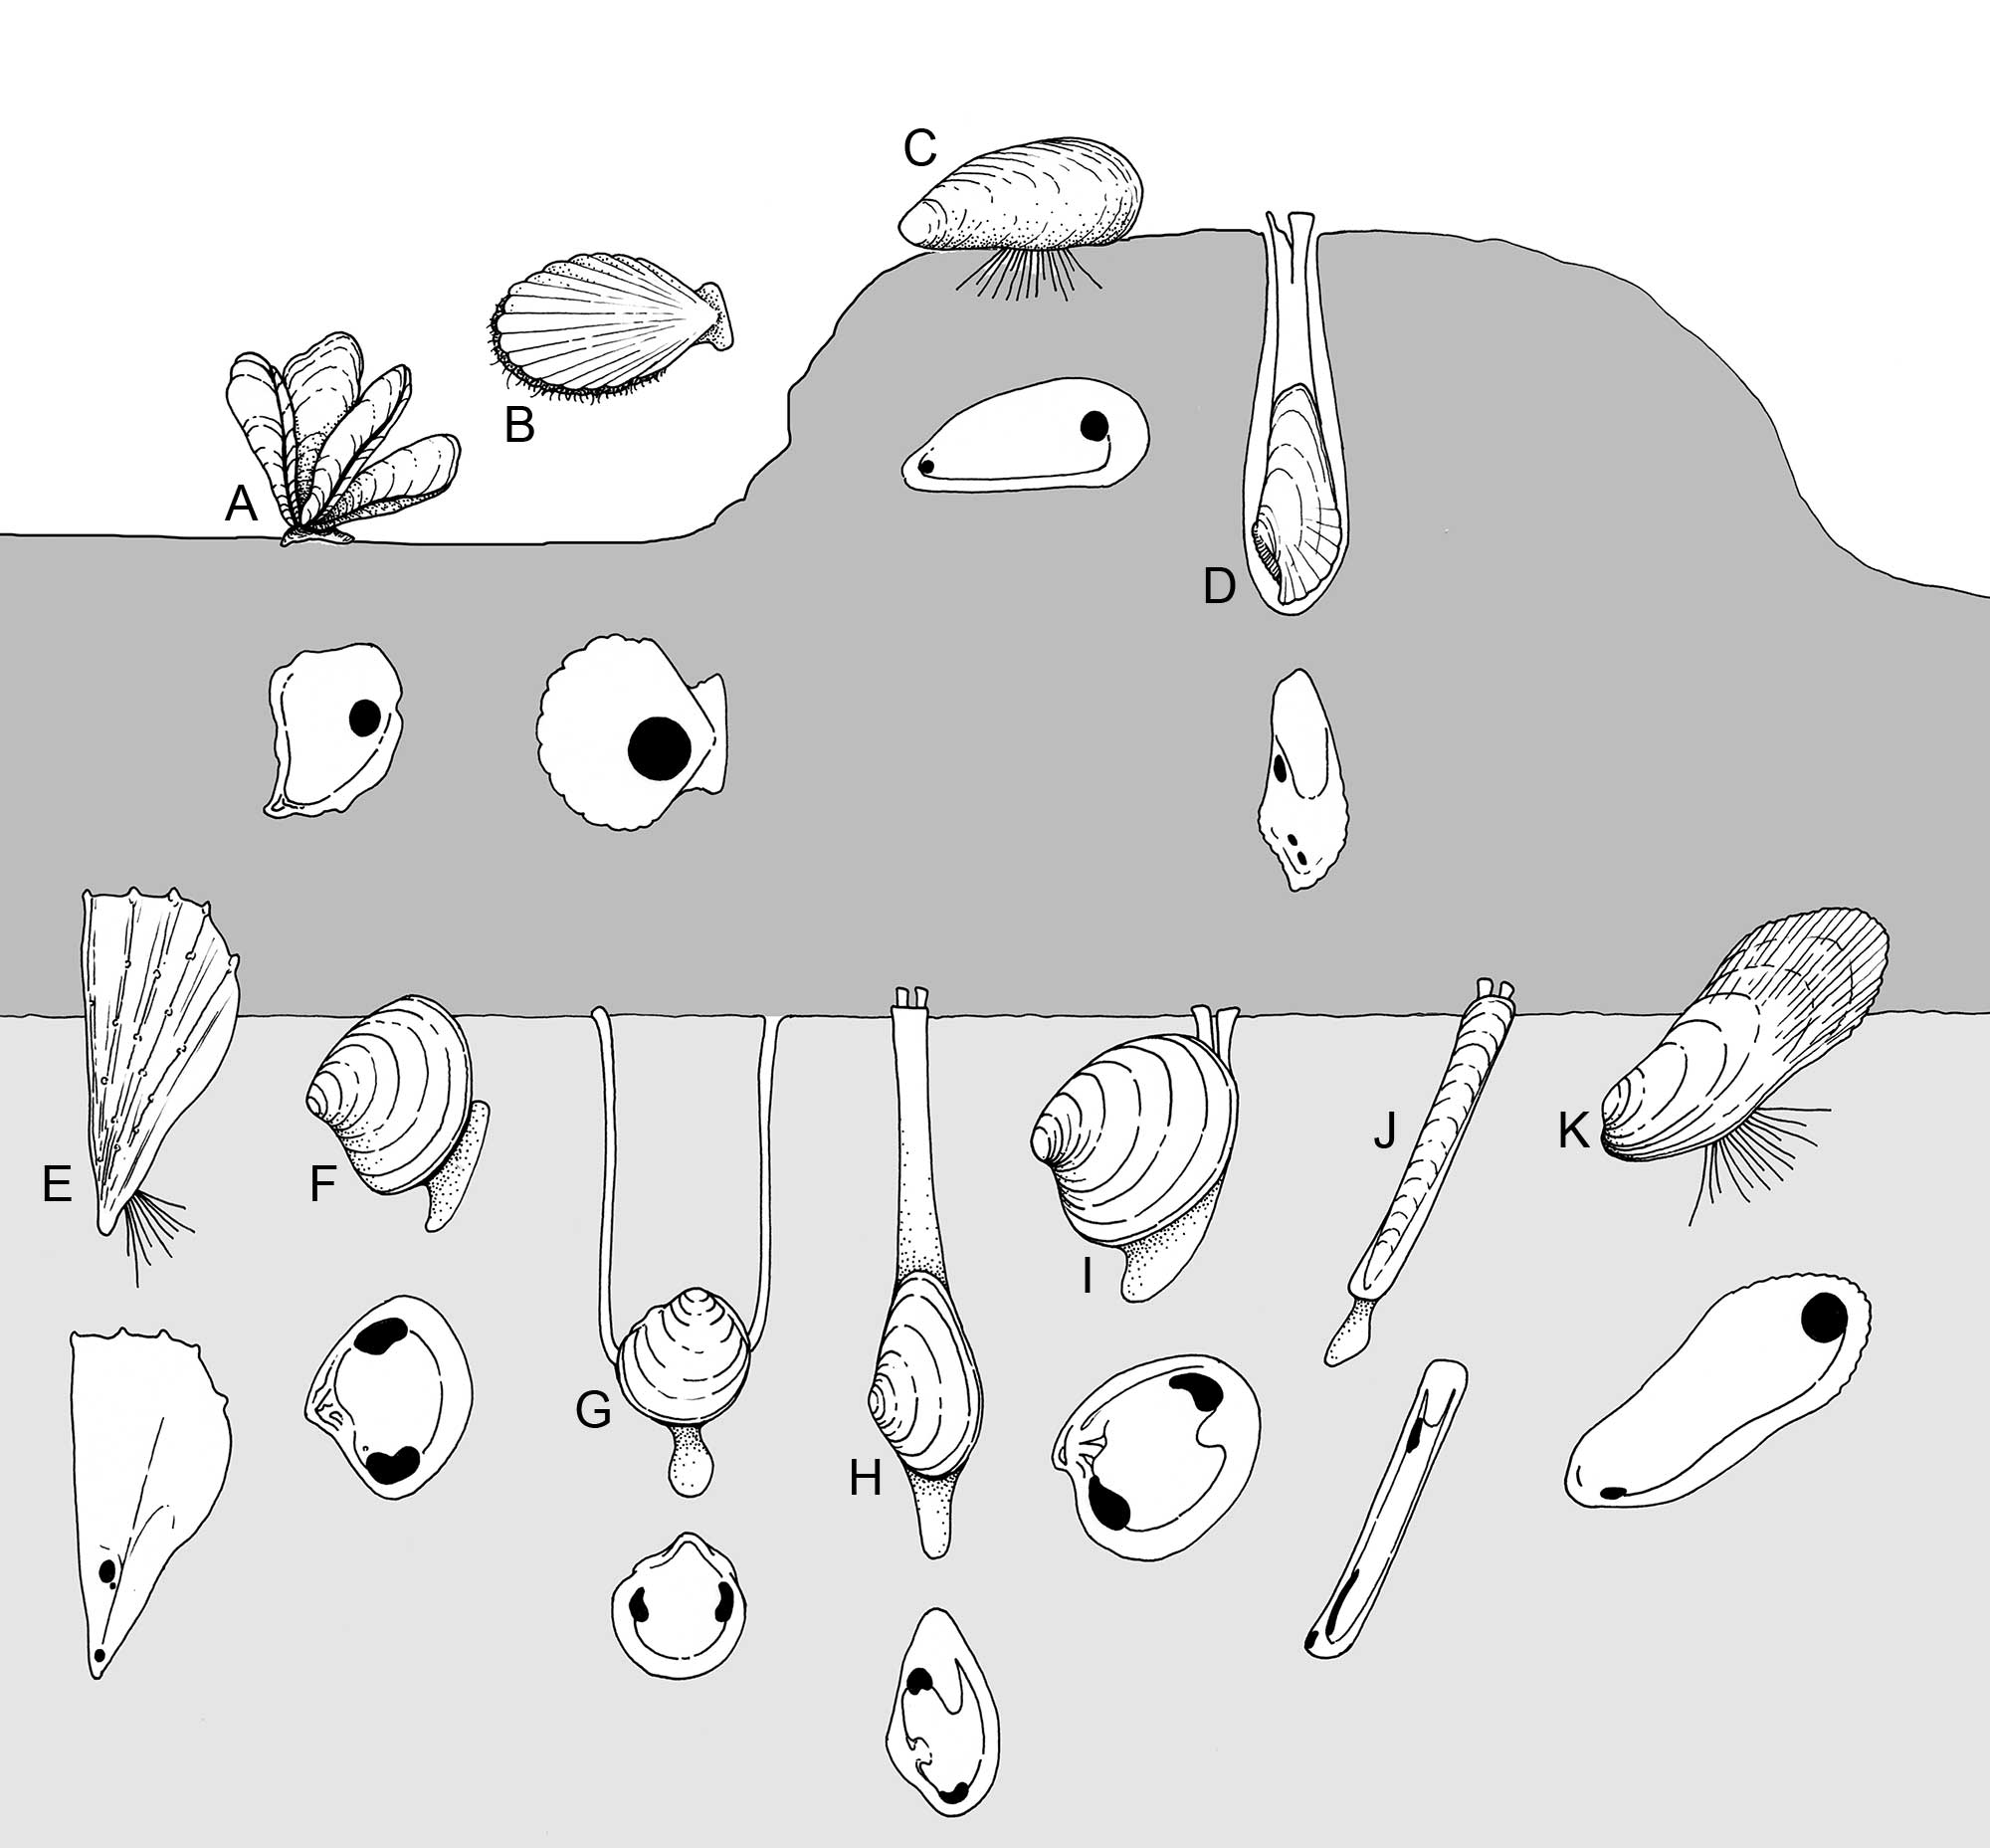 Illustration showing the diverse lifemodes of various benthic bivalves.